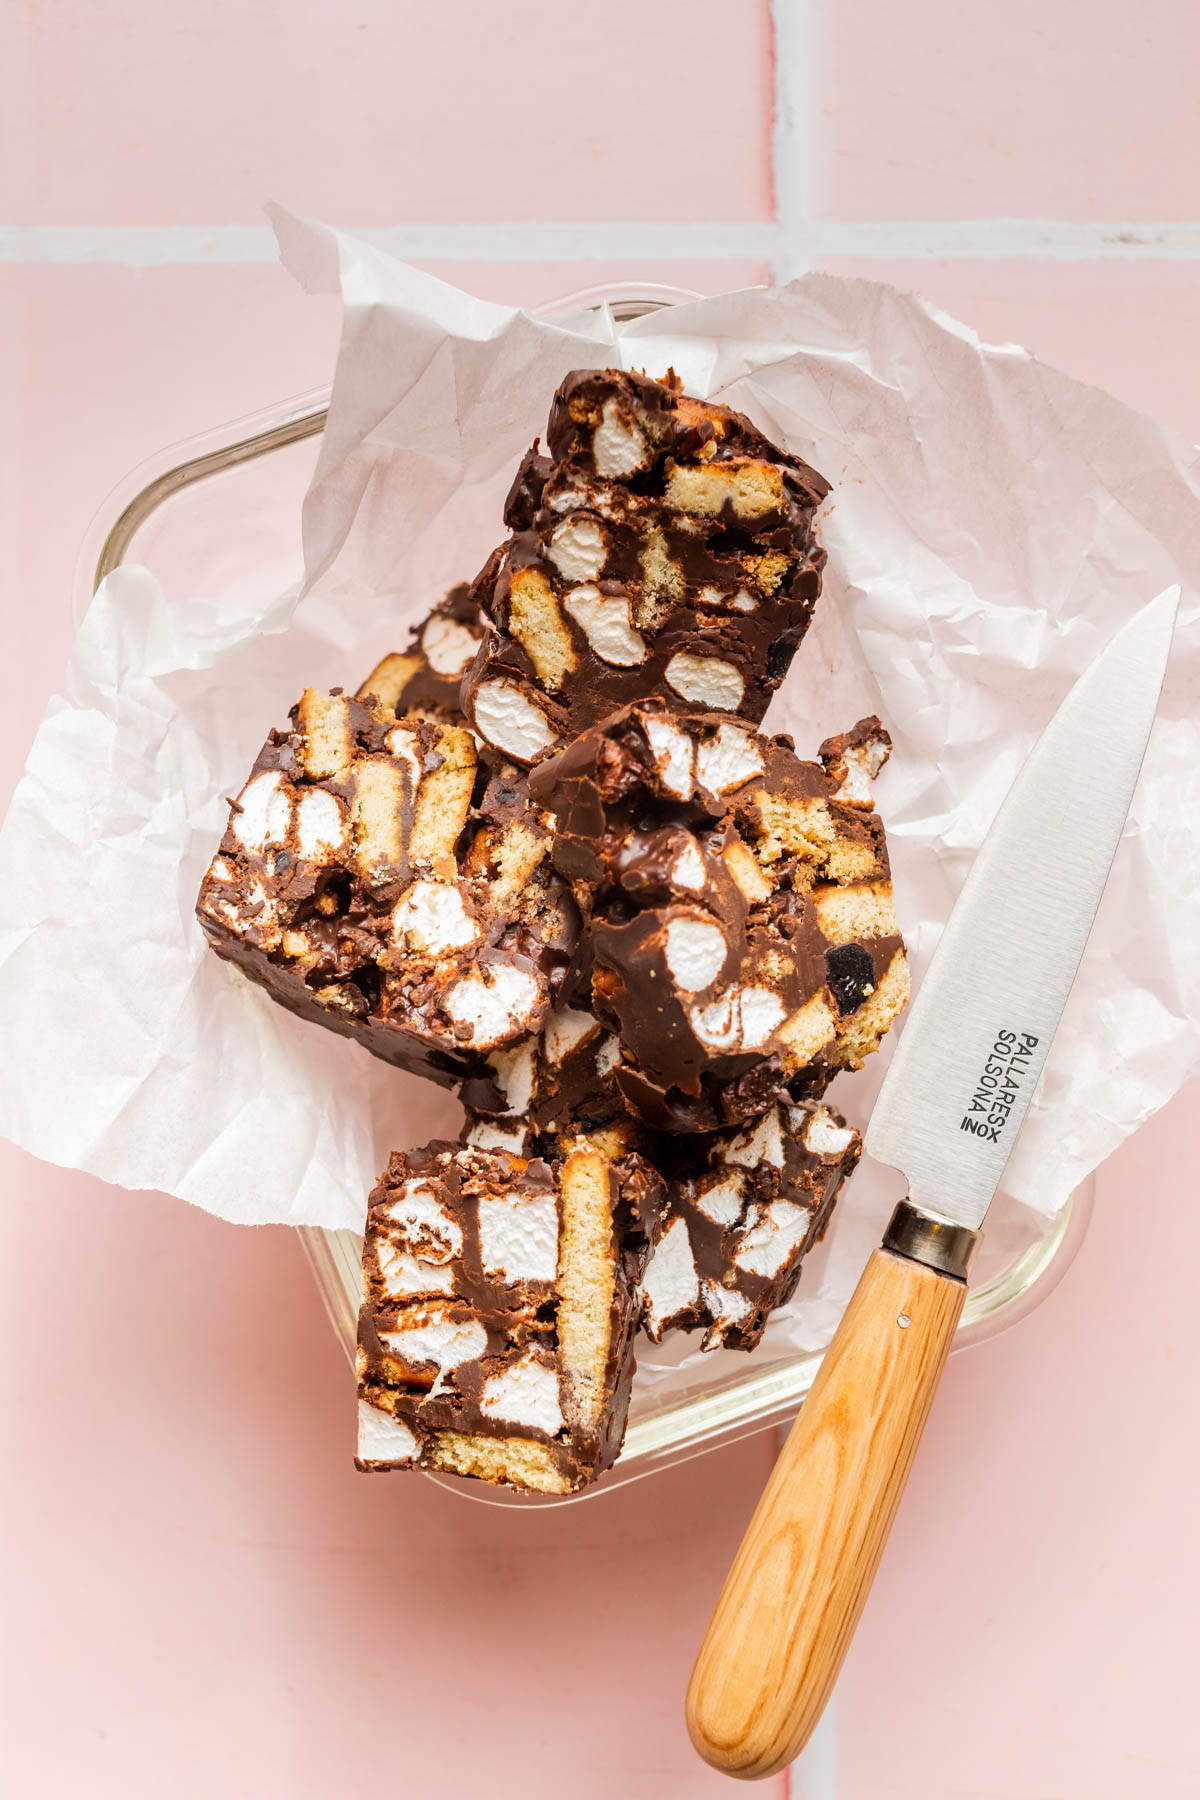 Rocky road pieces in a container with paper and a knife.